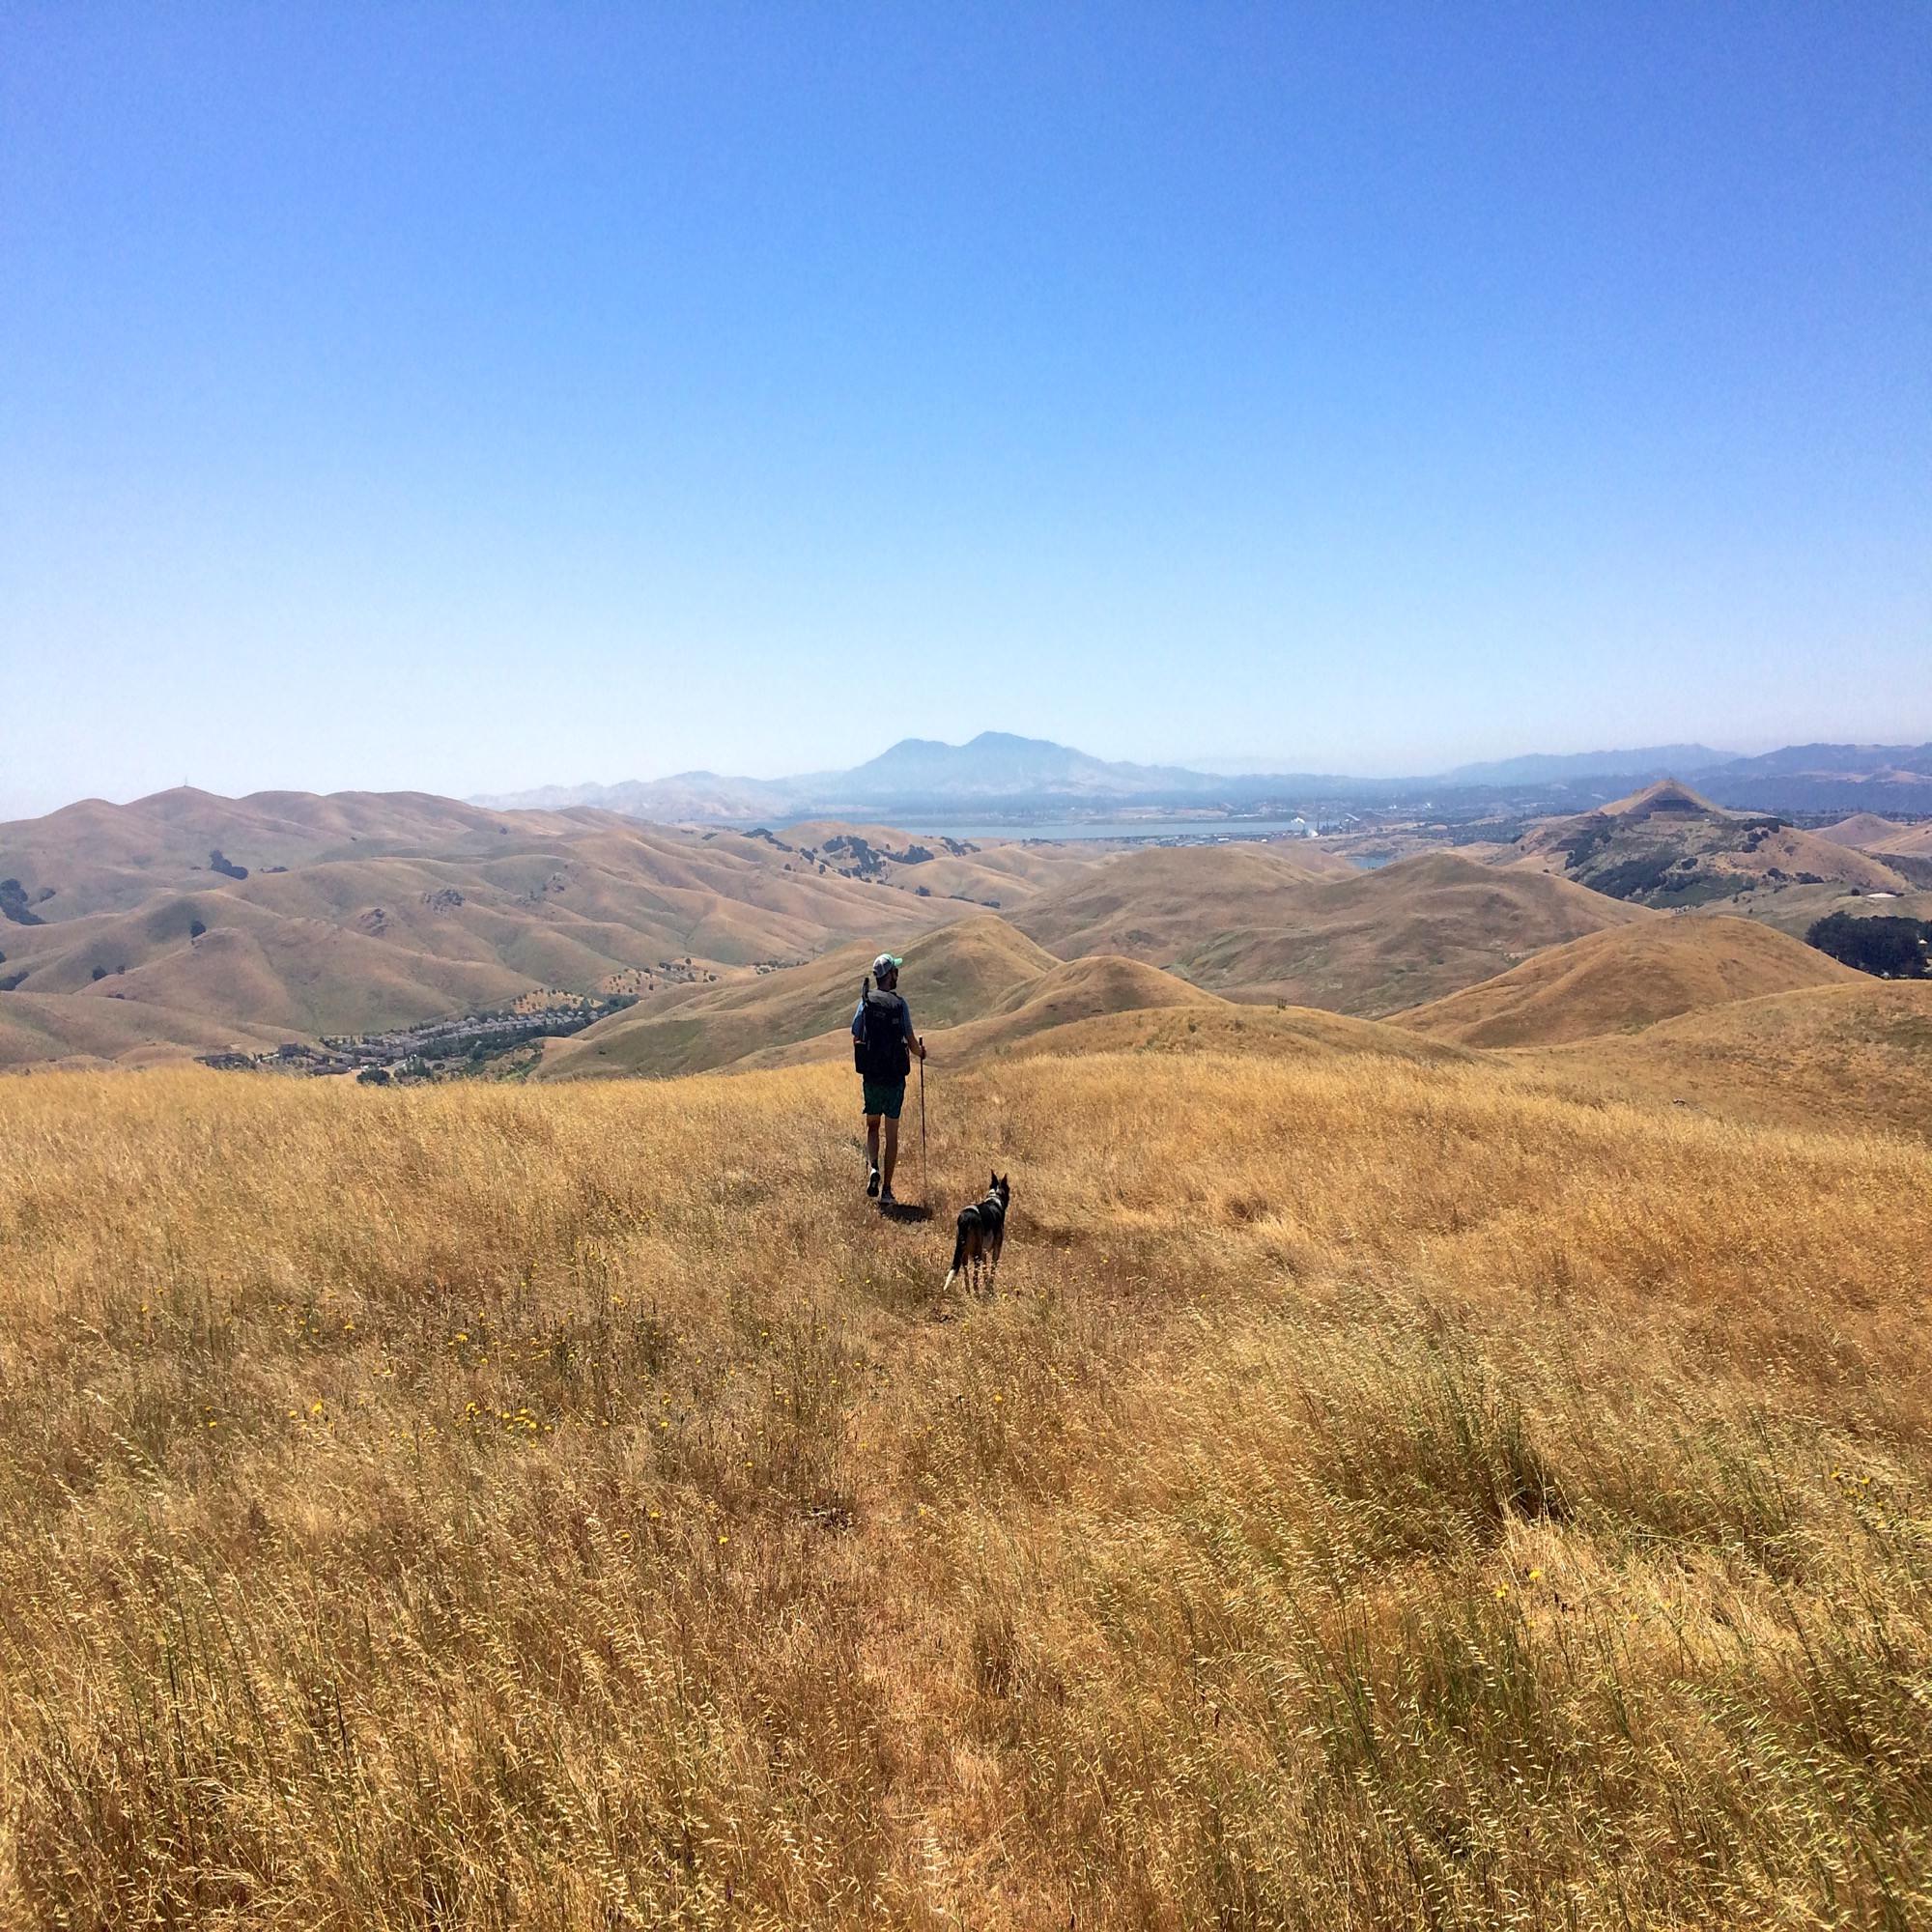 The author imagines he is in Montana on a training hike along the Bay Area Ridge Trail in California.